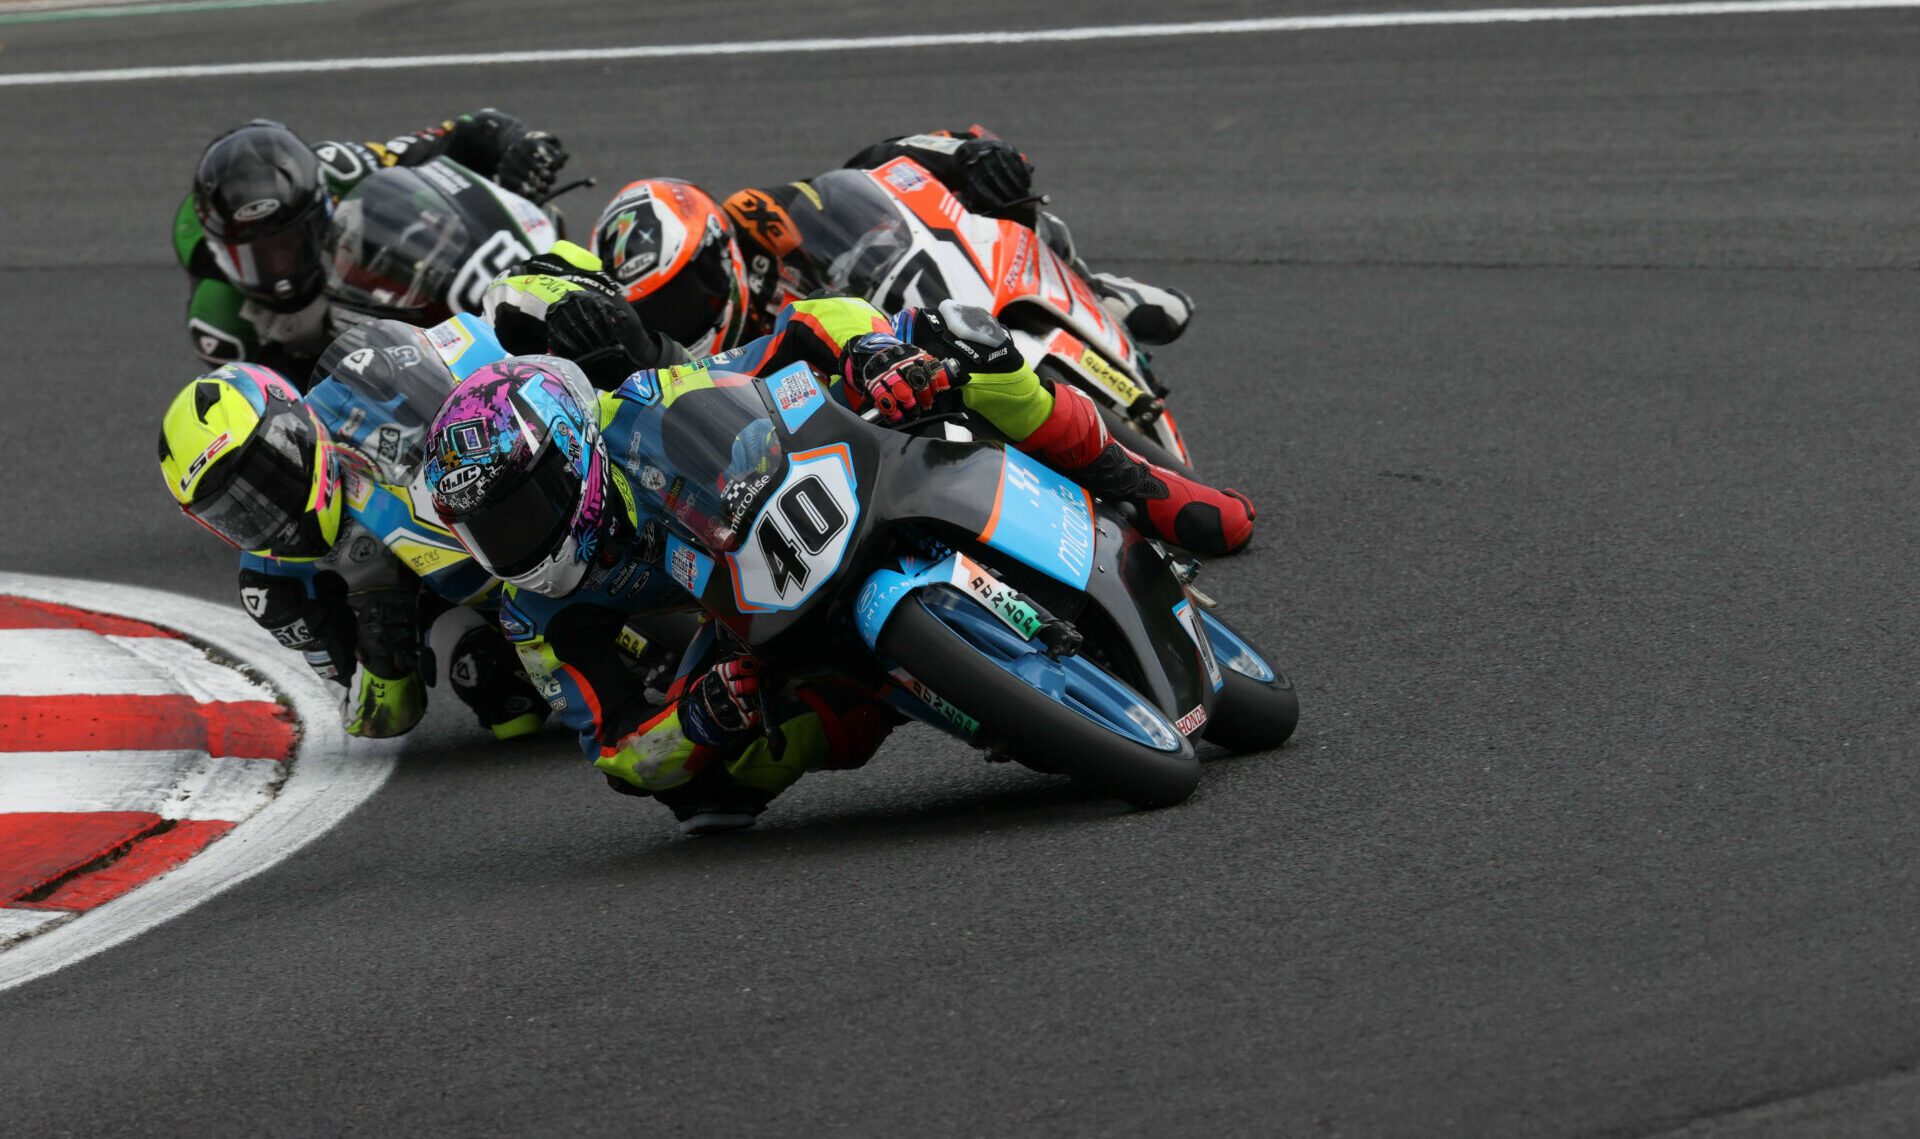 American Julian Correa (40) leads a group of riders at Brands Hatch. Photo courtesy BTC.